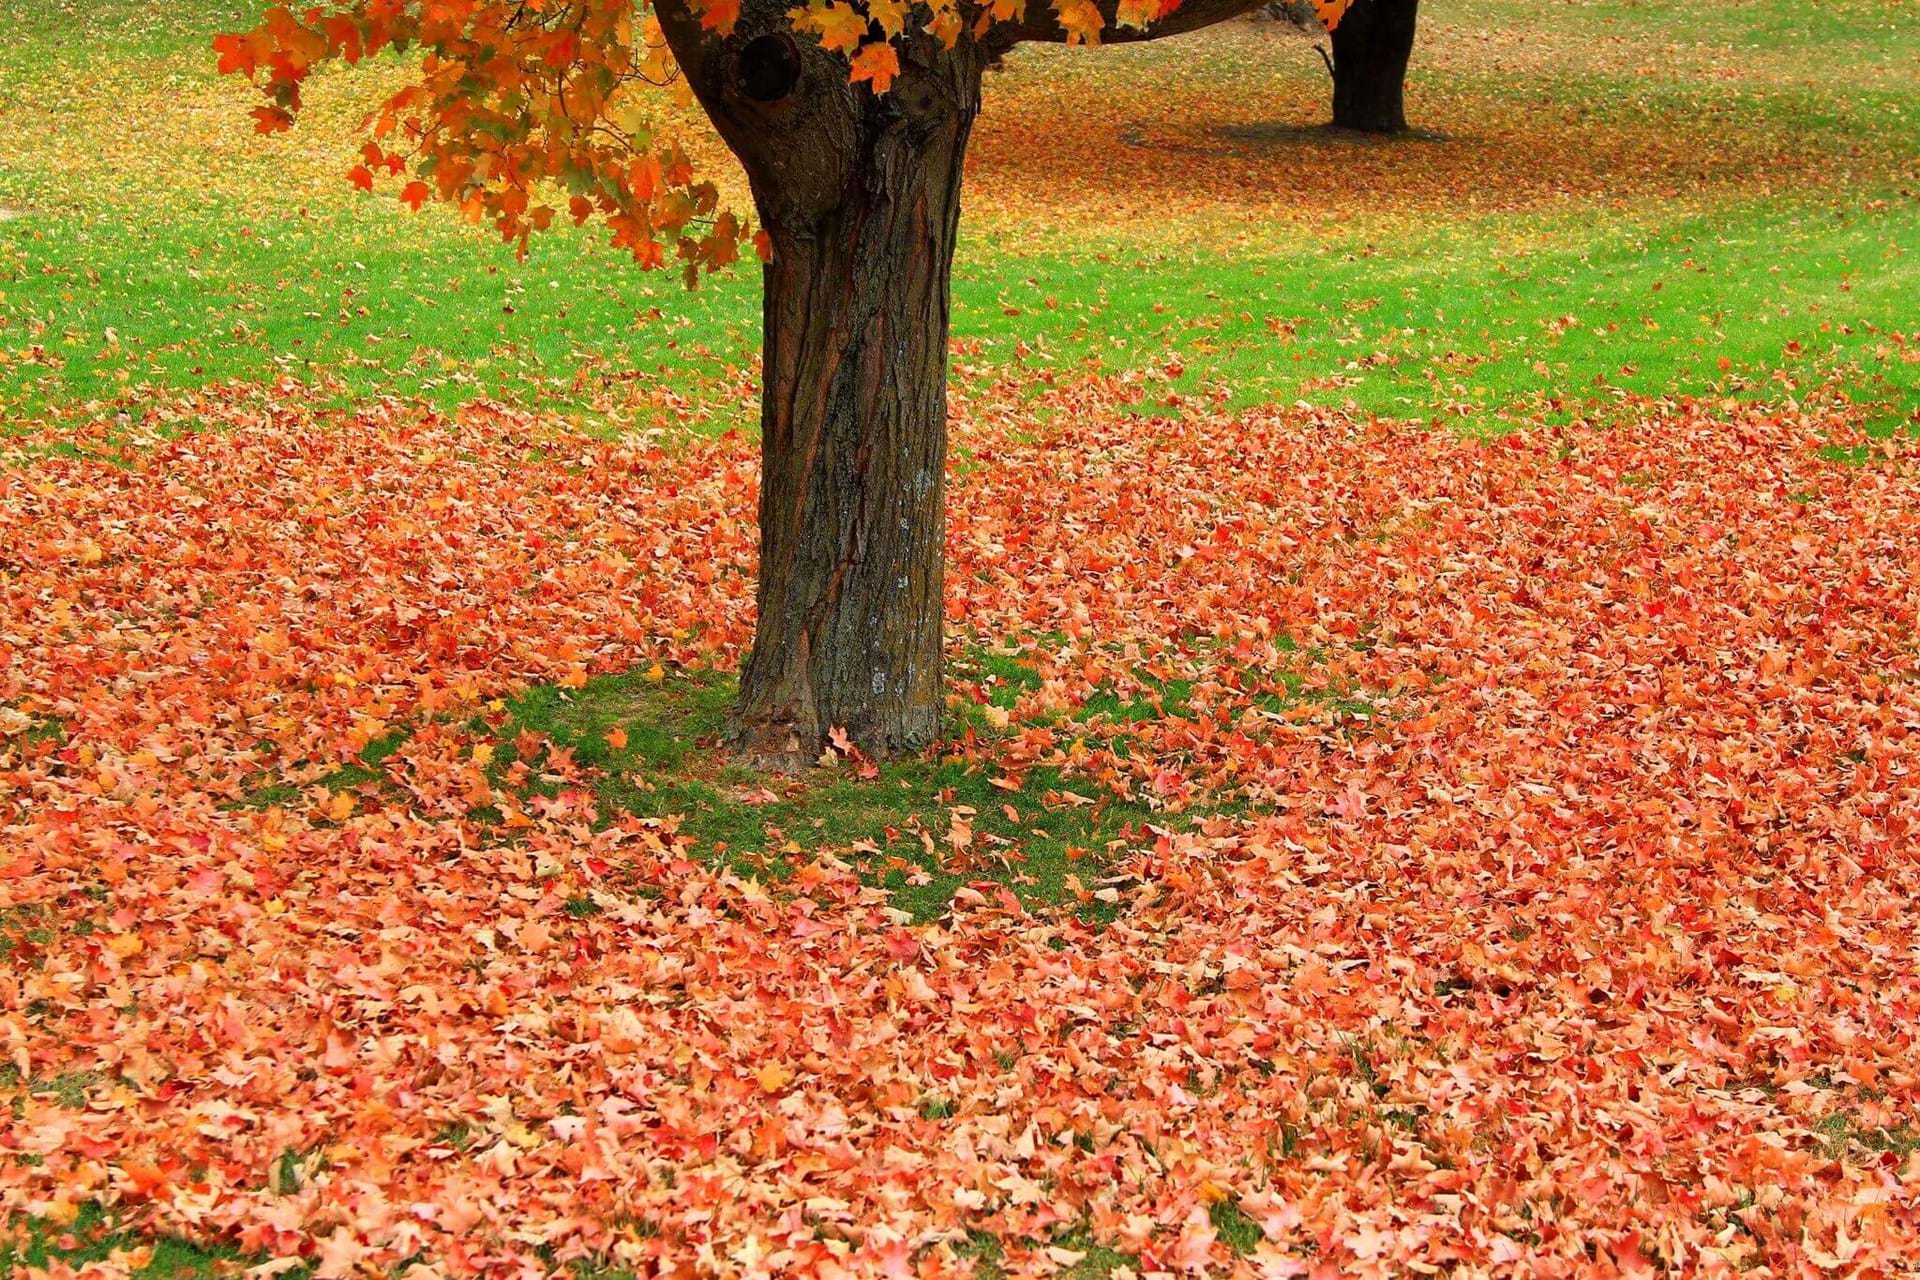 The bright orange and red leaves of a tree laying around it's base